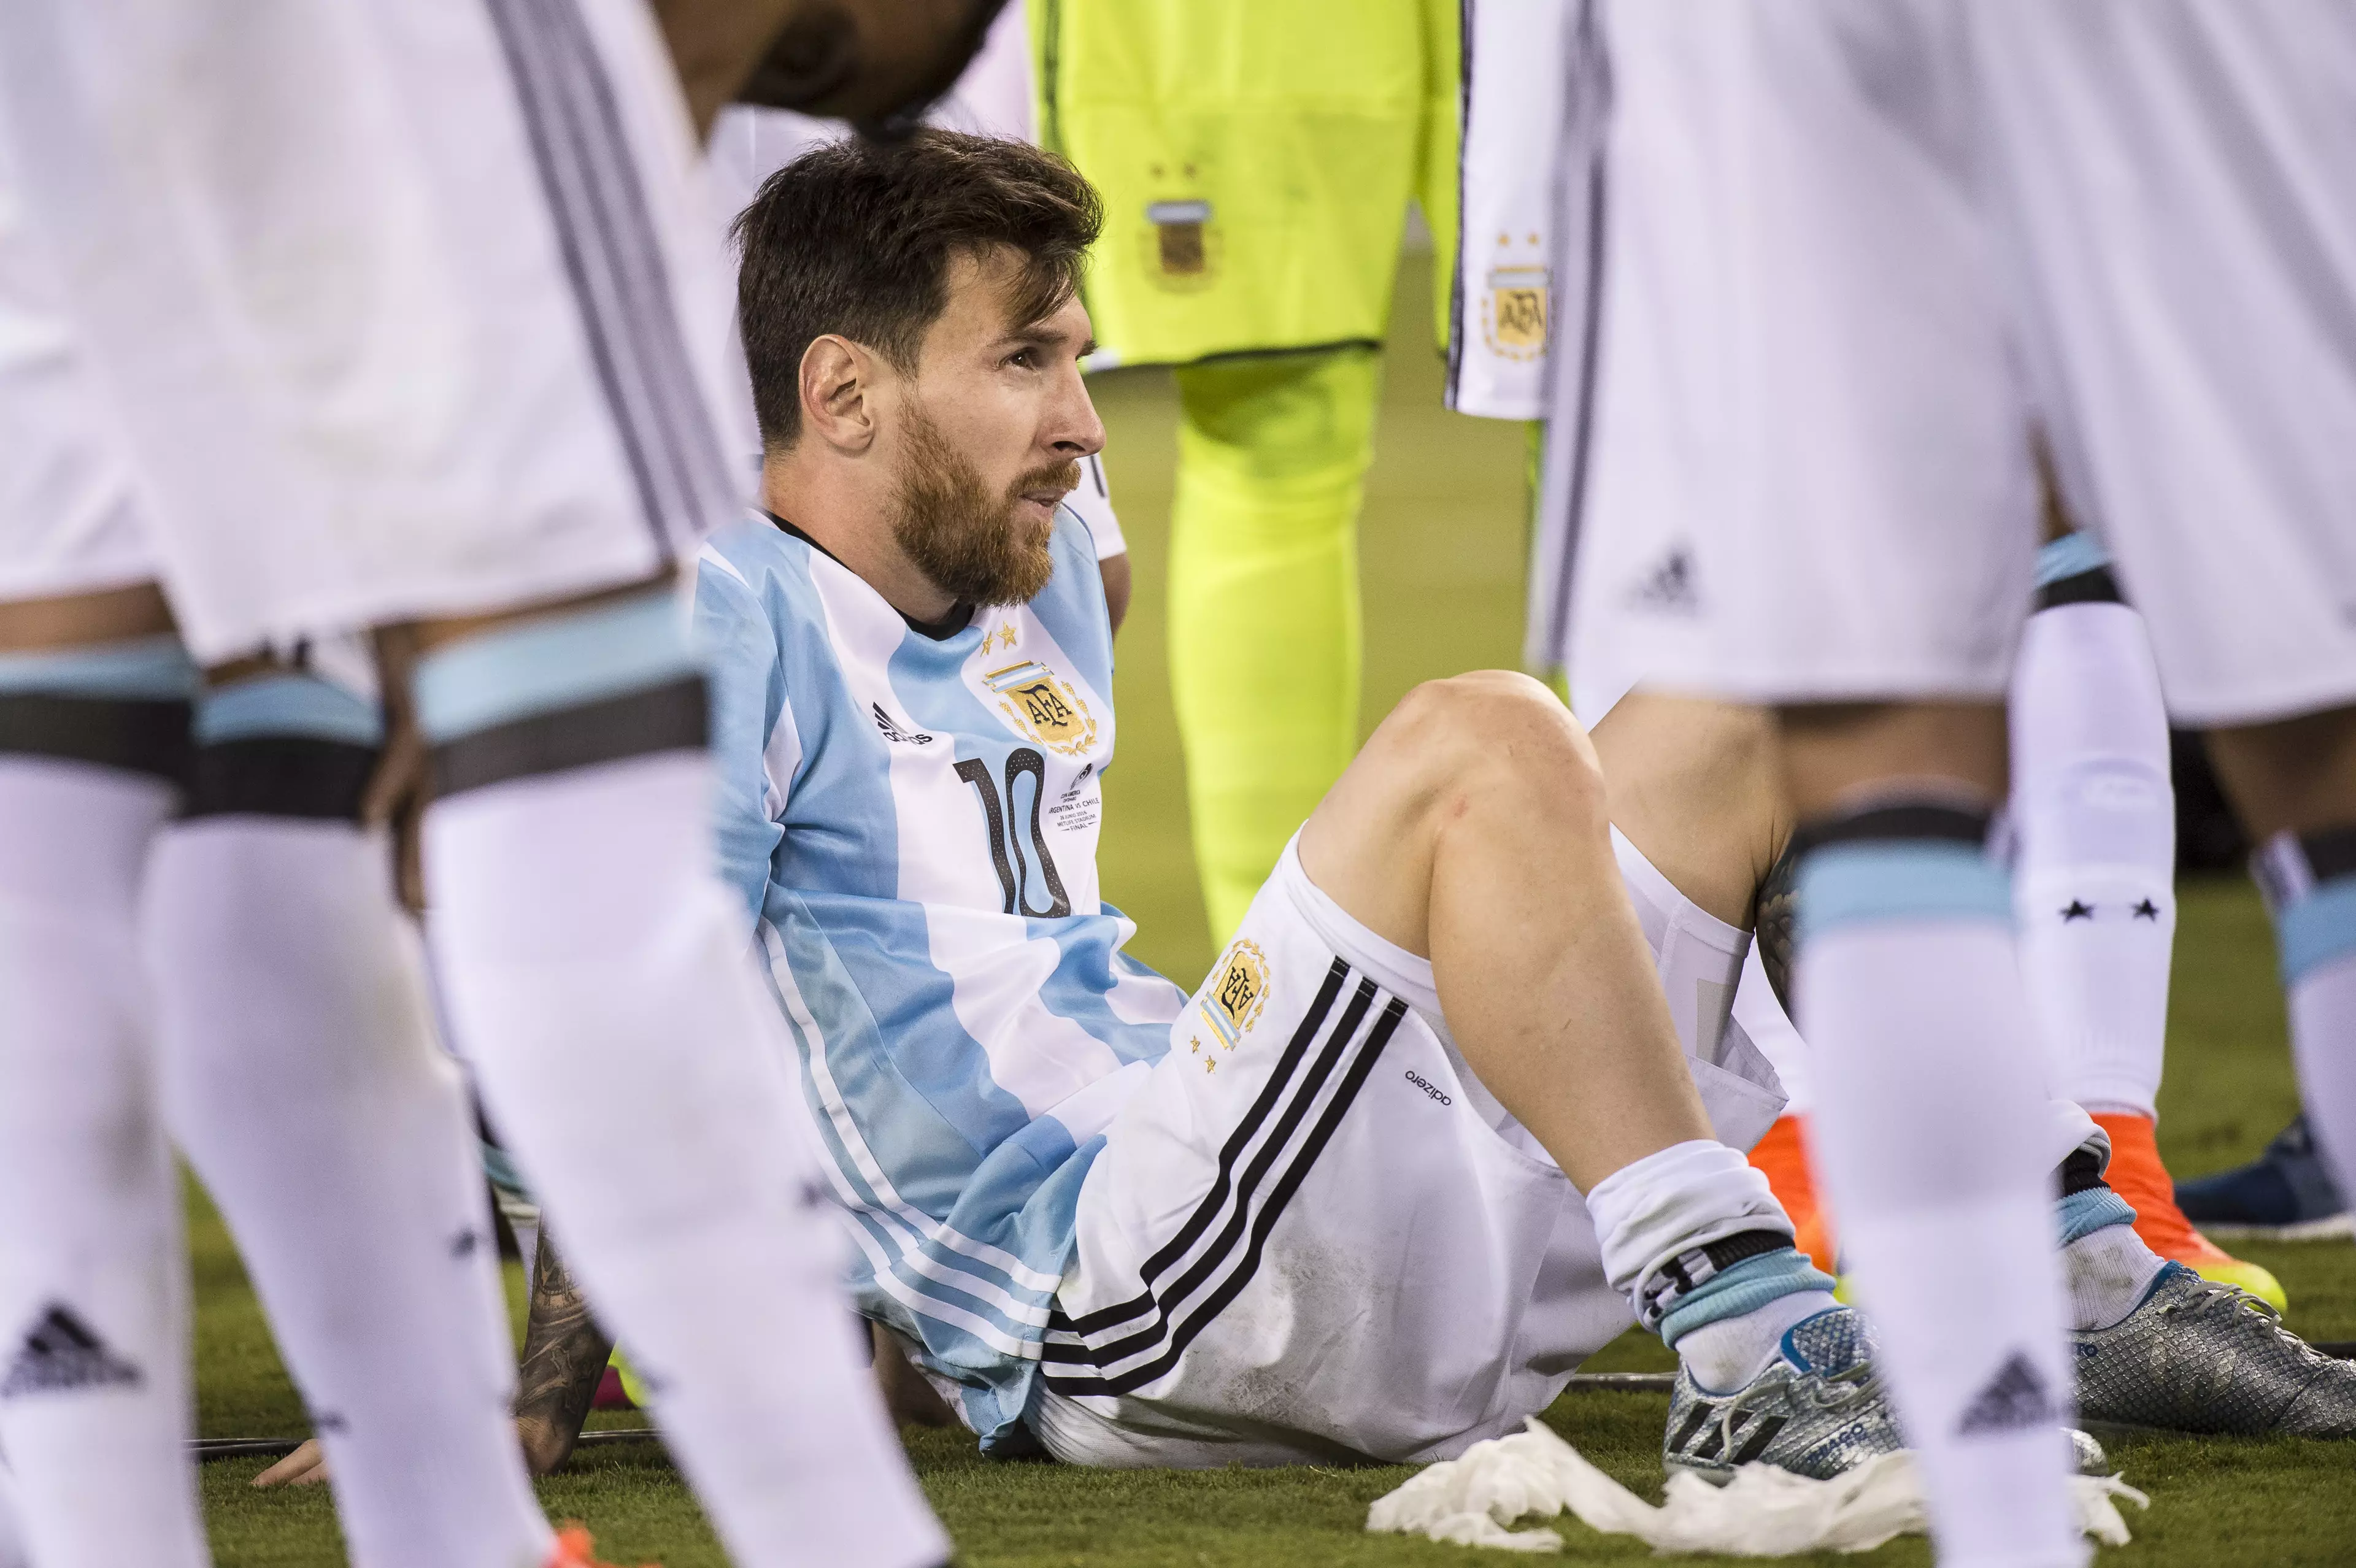 Lionel Messi after Argentina's defeat to Chile in the 2016 Copa America Final (Image